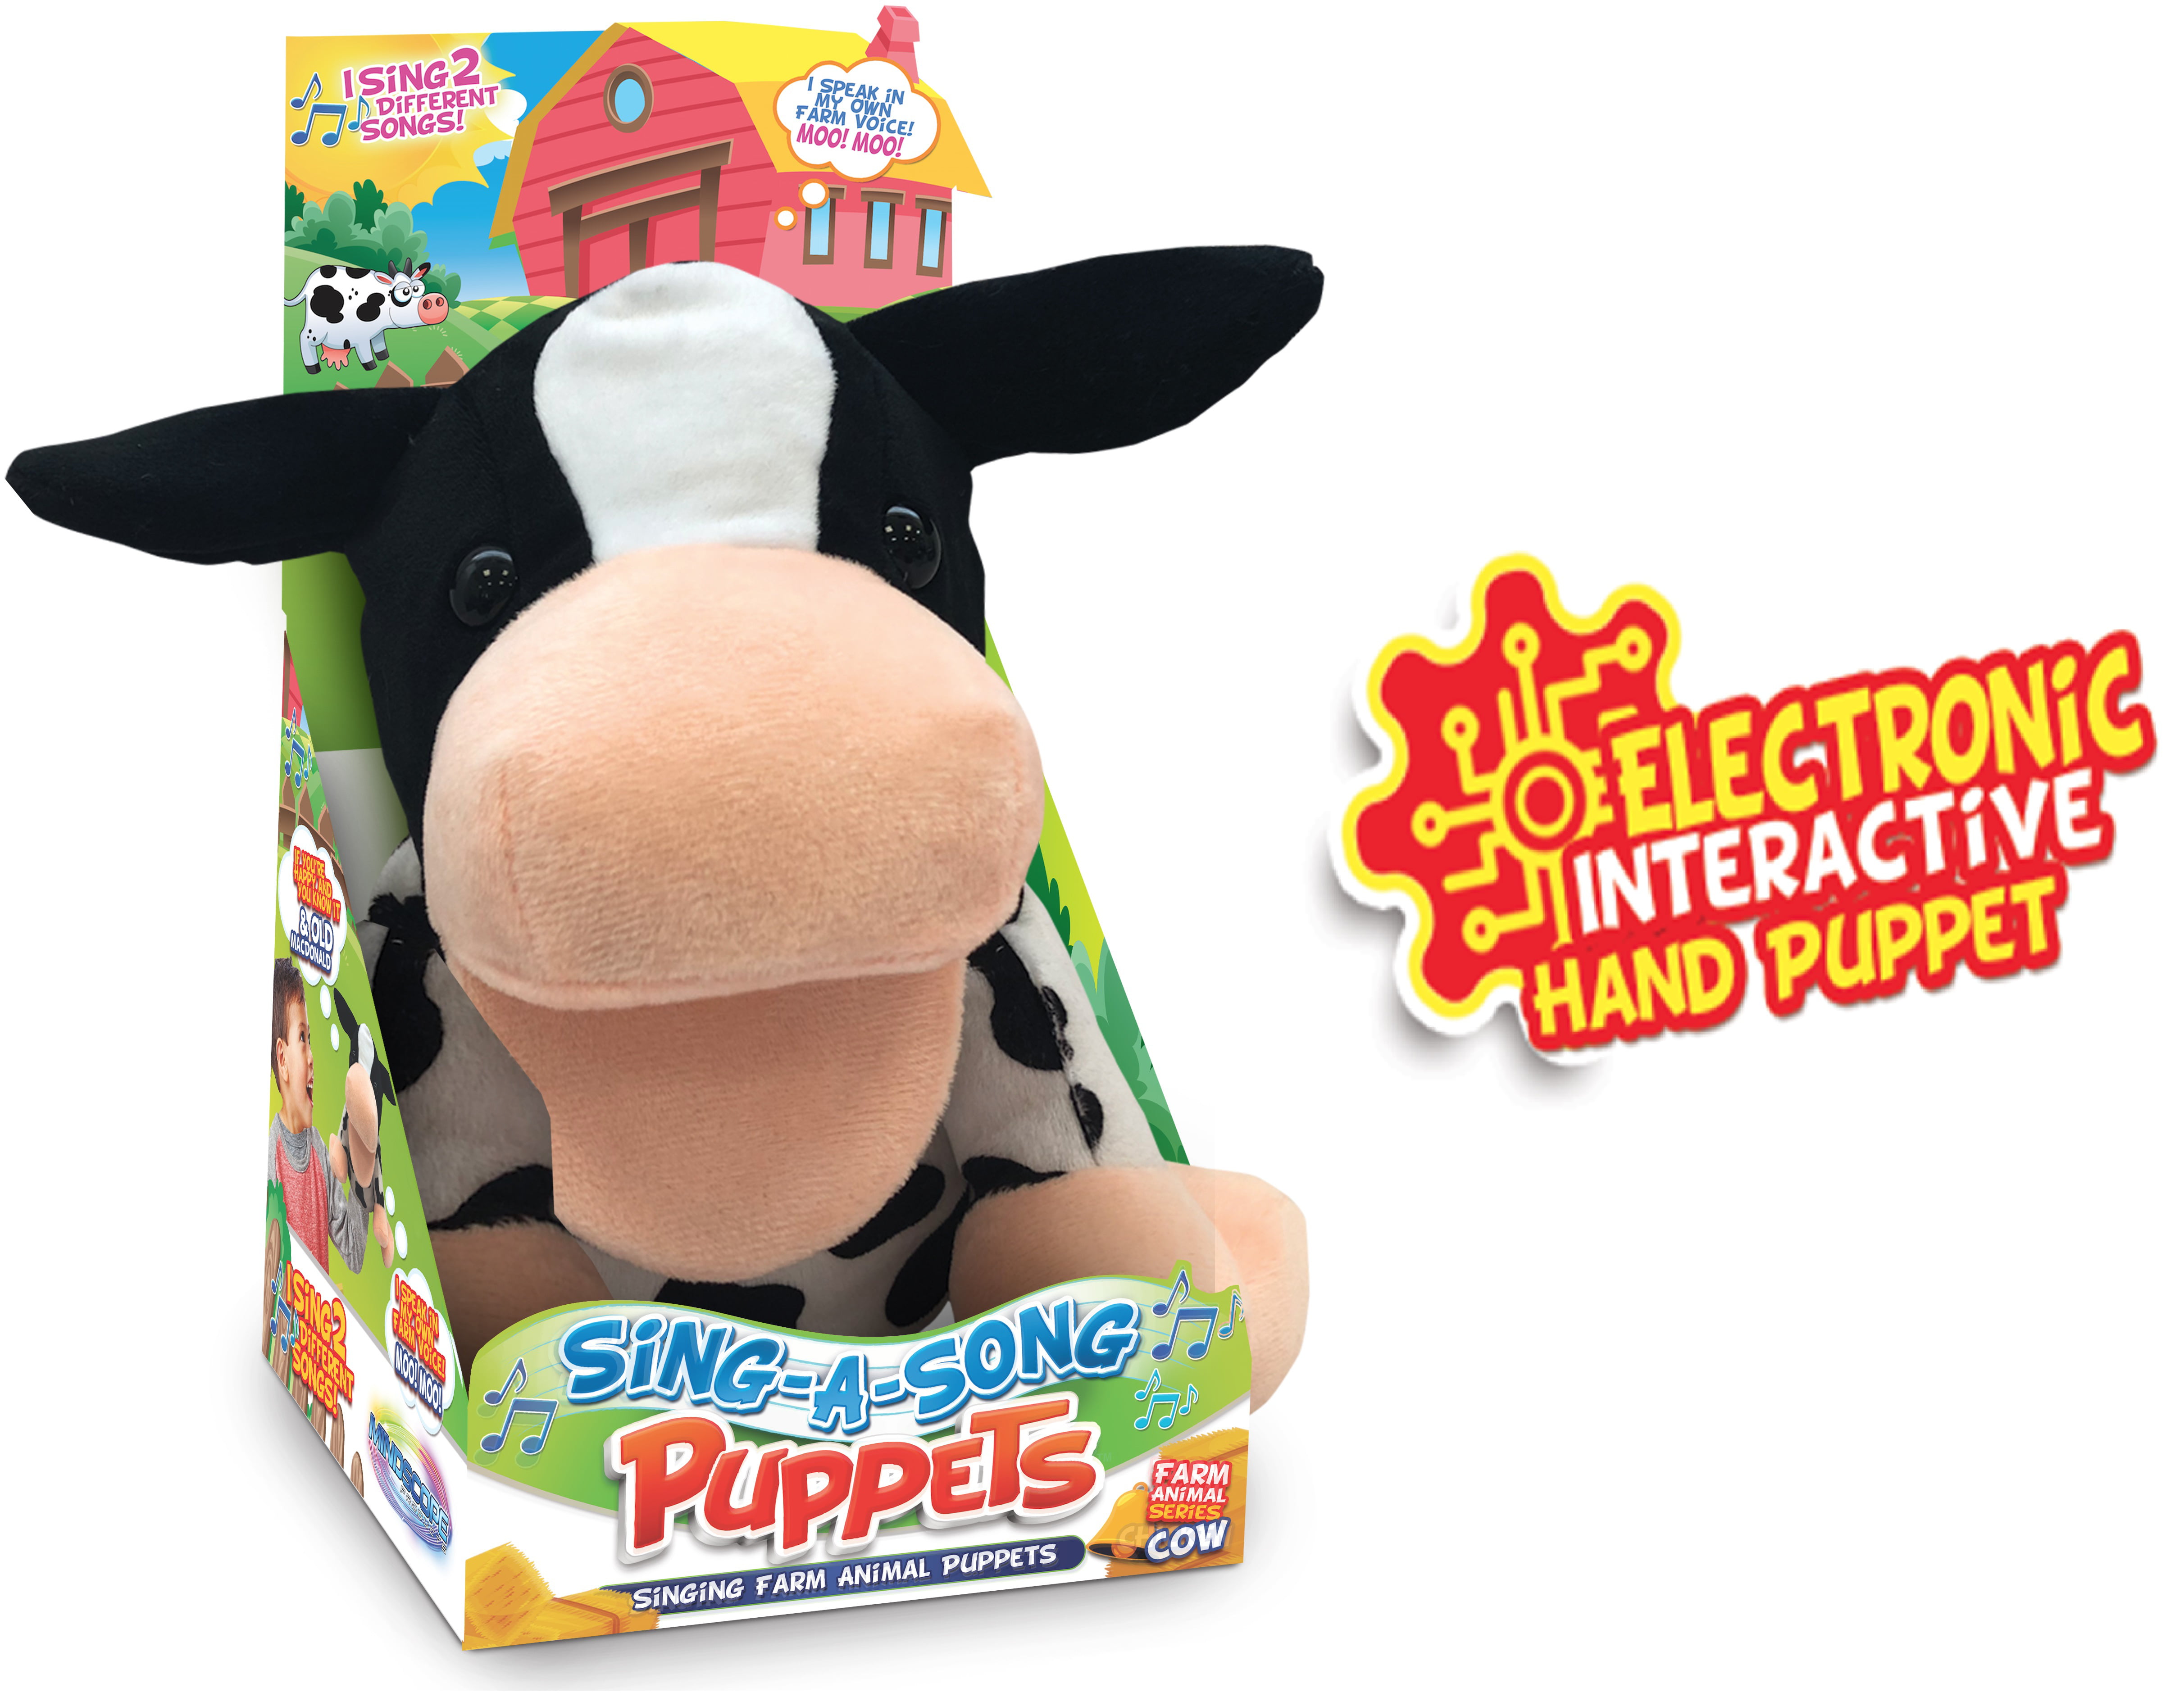 Pig Mindscope Sing-A-Song Puppets Electronic Singing Animal Puppets Make Animal Noises And Also Sing Old Macdonald And If You Are Happy And You Know It